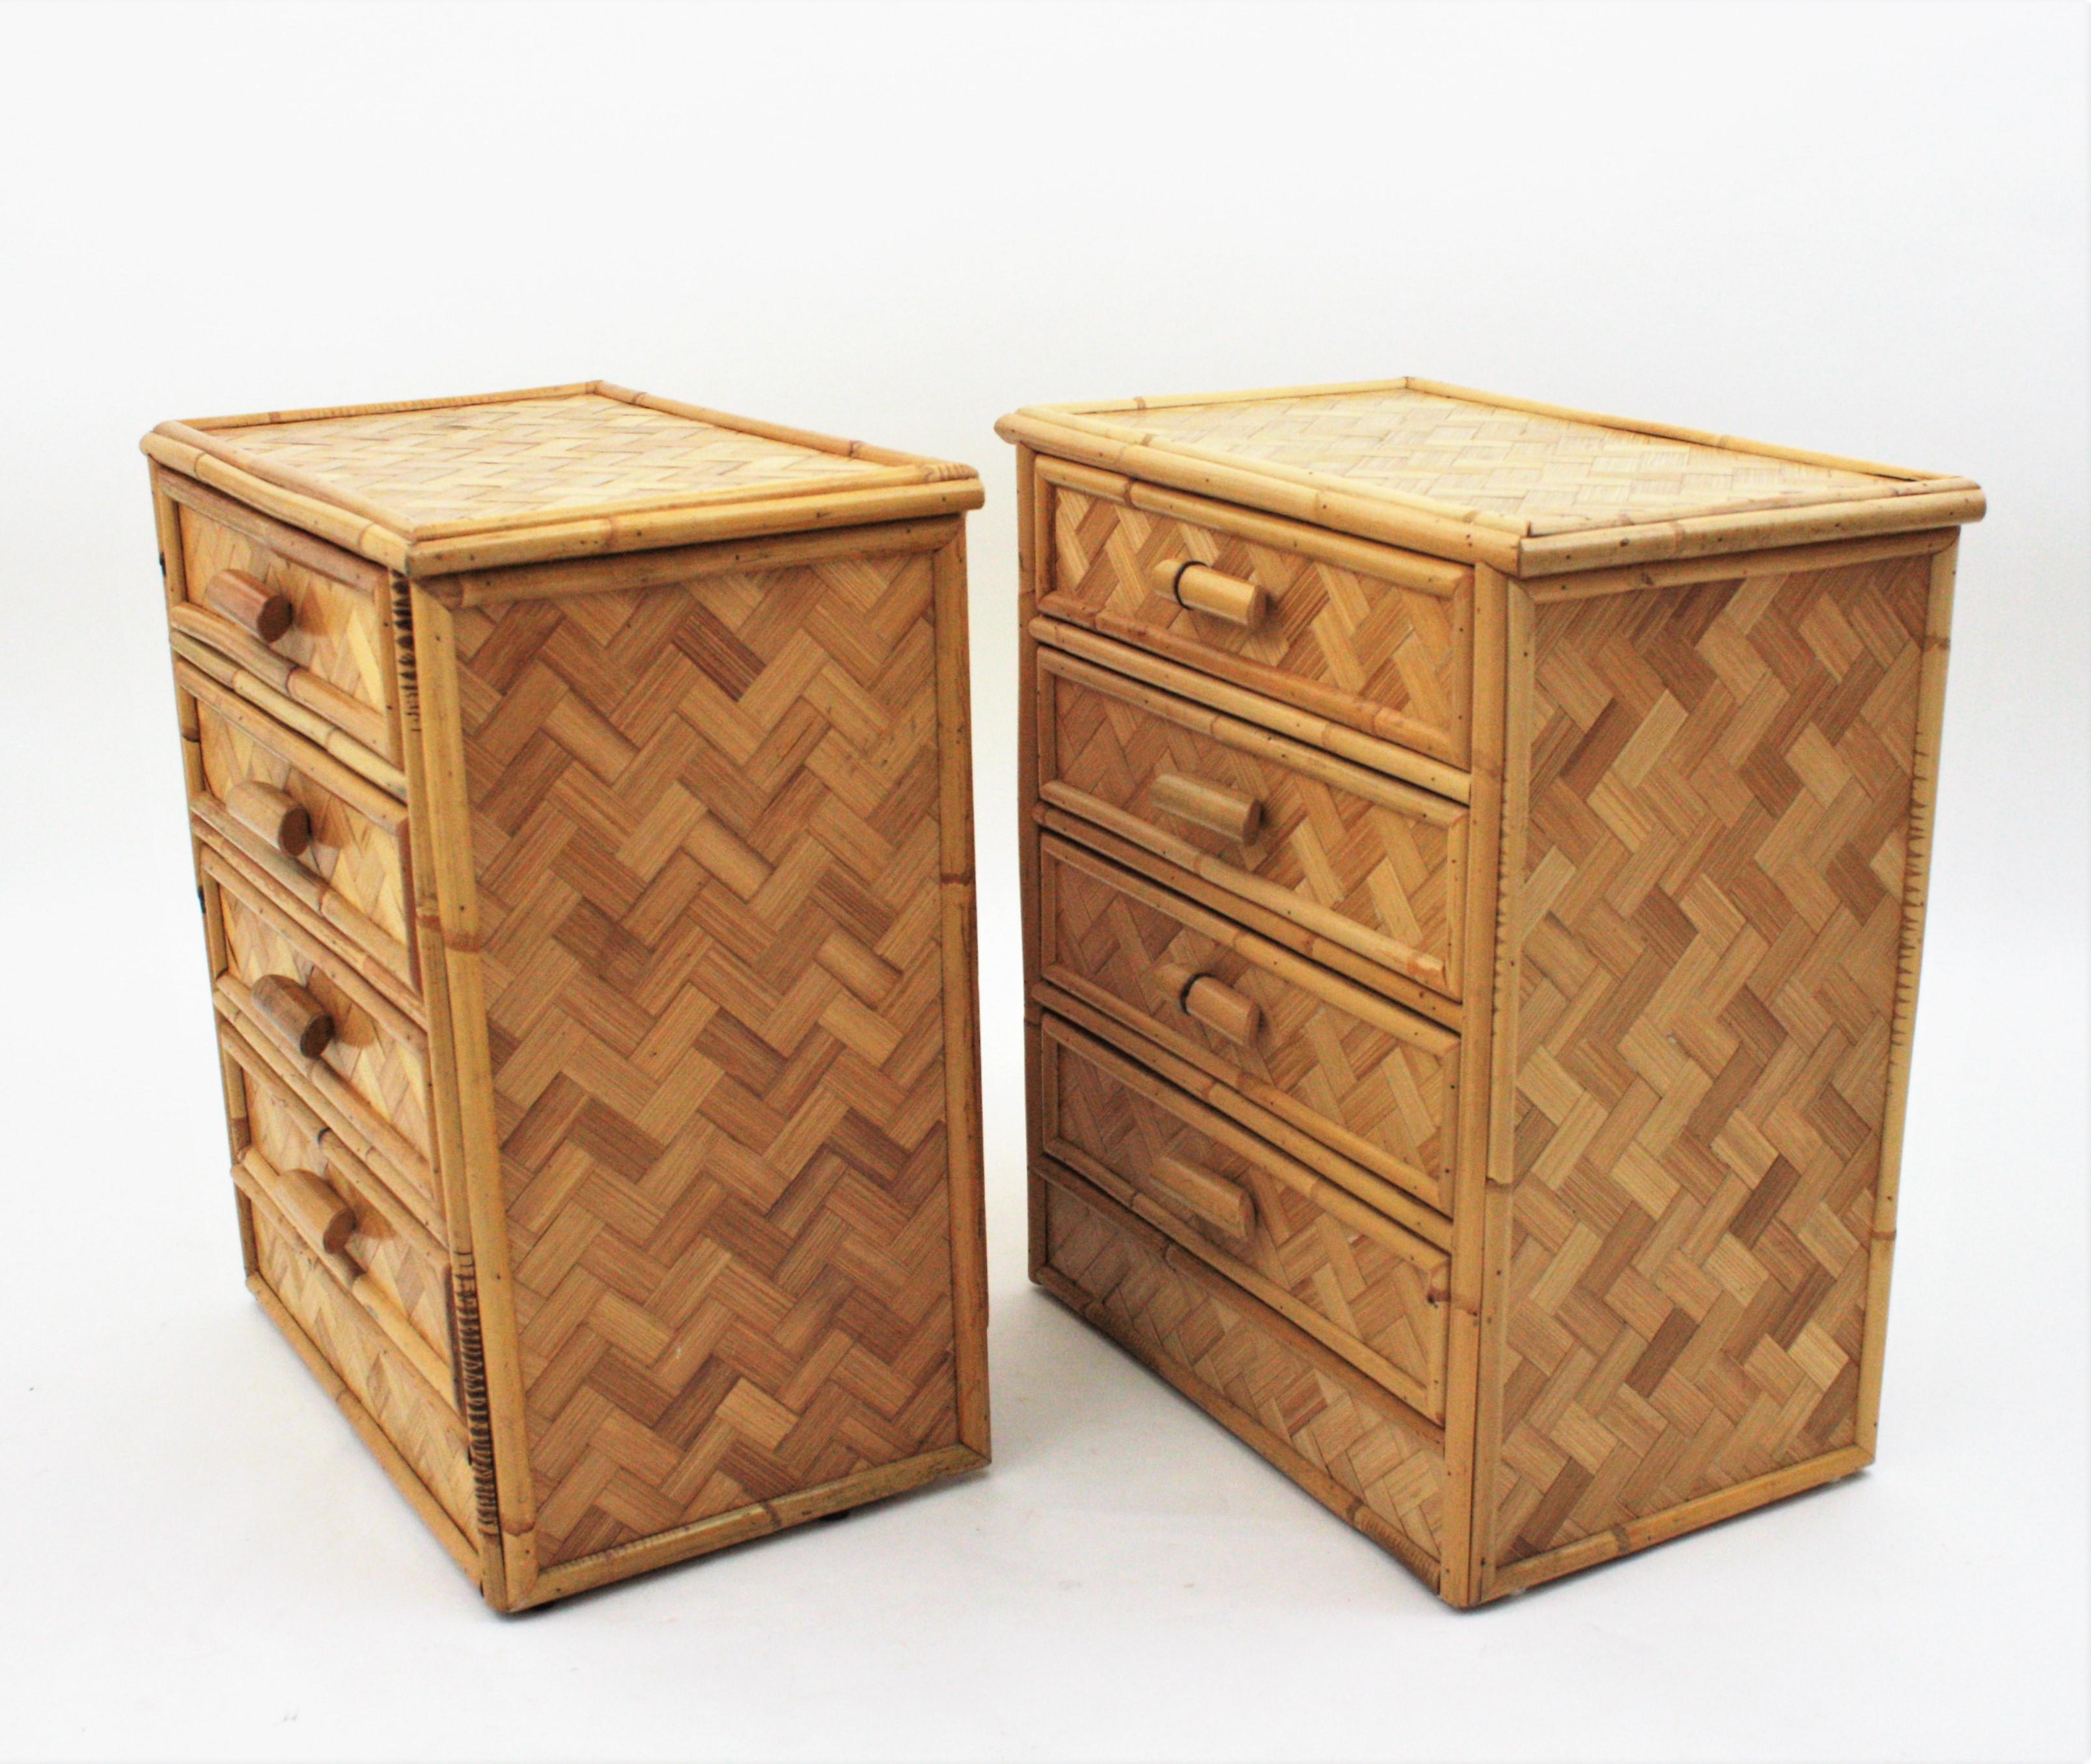 Pair of Rattan Bamboo Nightstands / Small Chests, 1970s For Sale 1